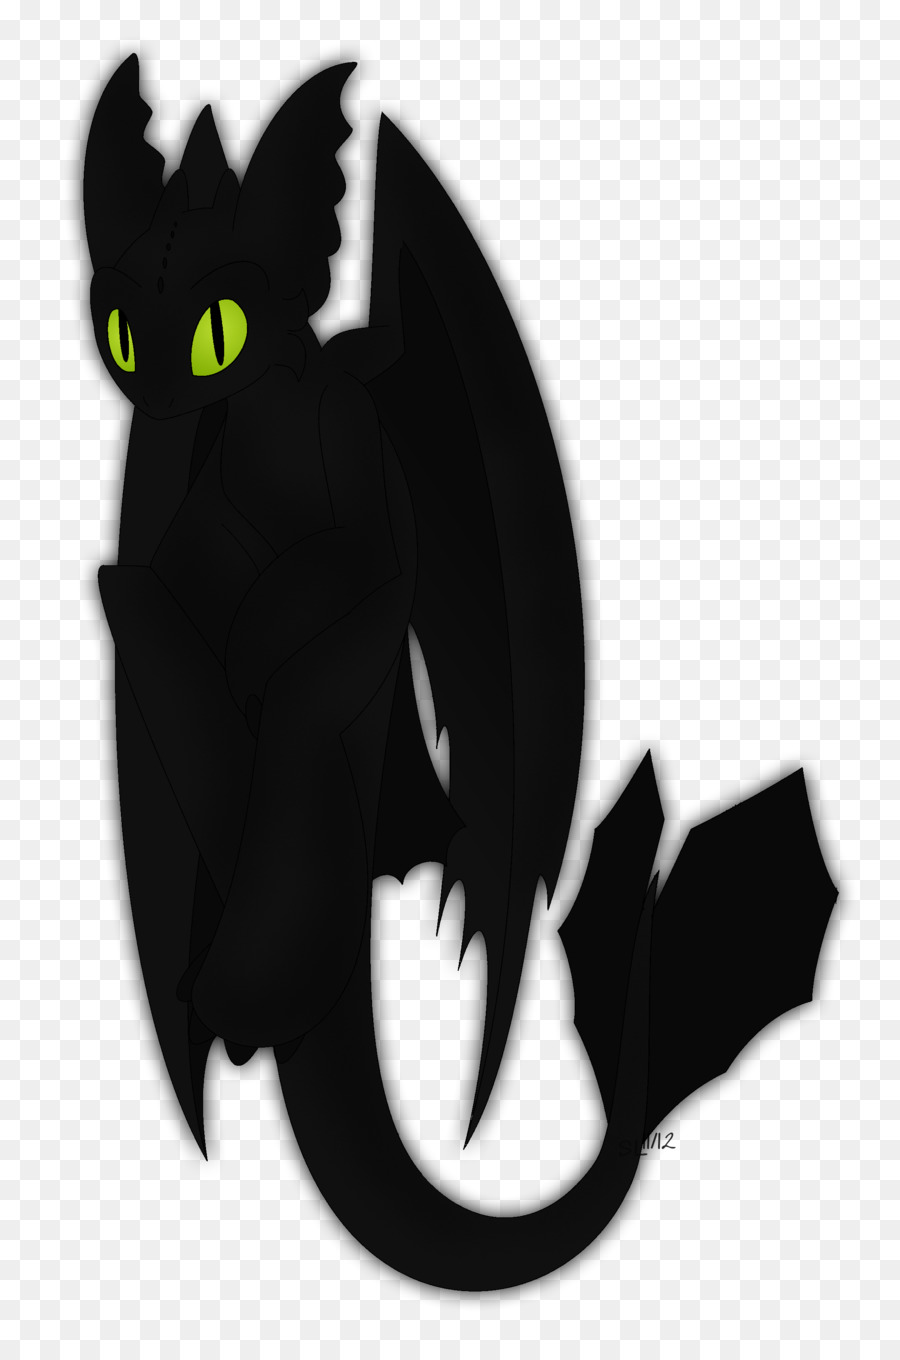 Cat Artist Toothless Animal - toothless png download - 900*1353 - Free Transparent Cat png Download.